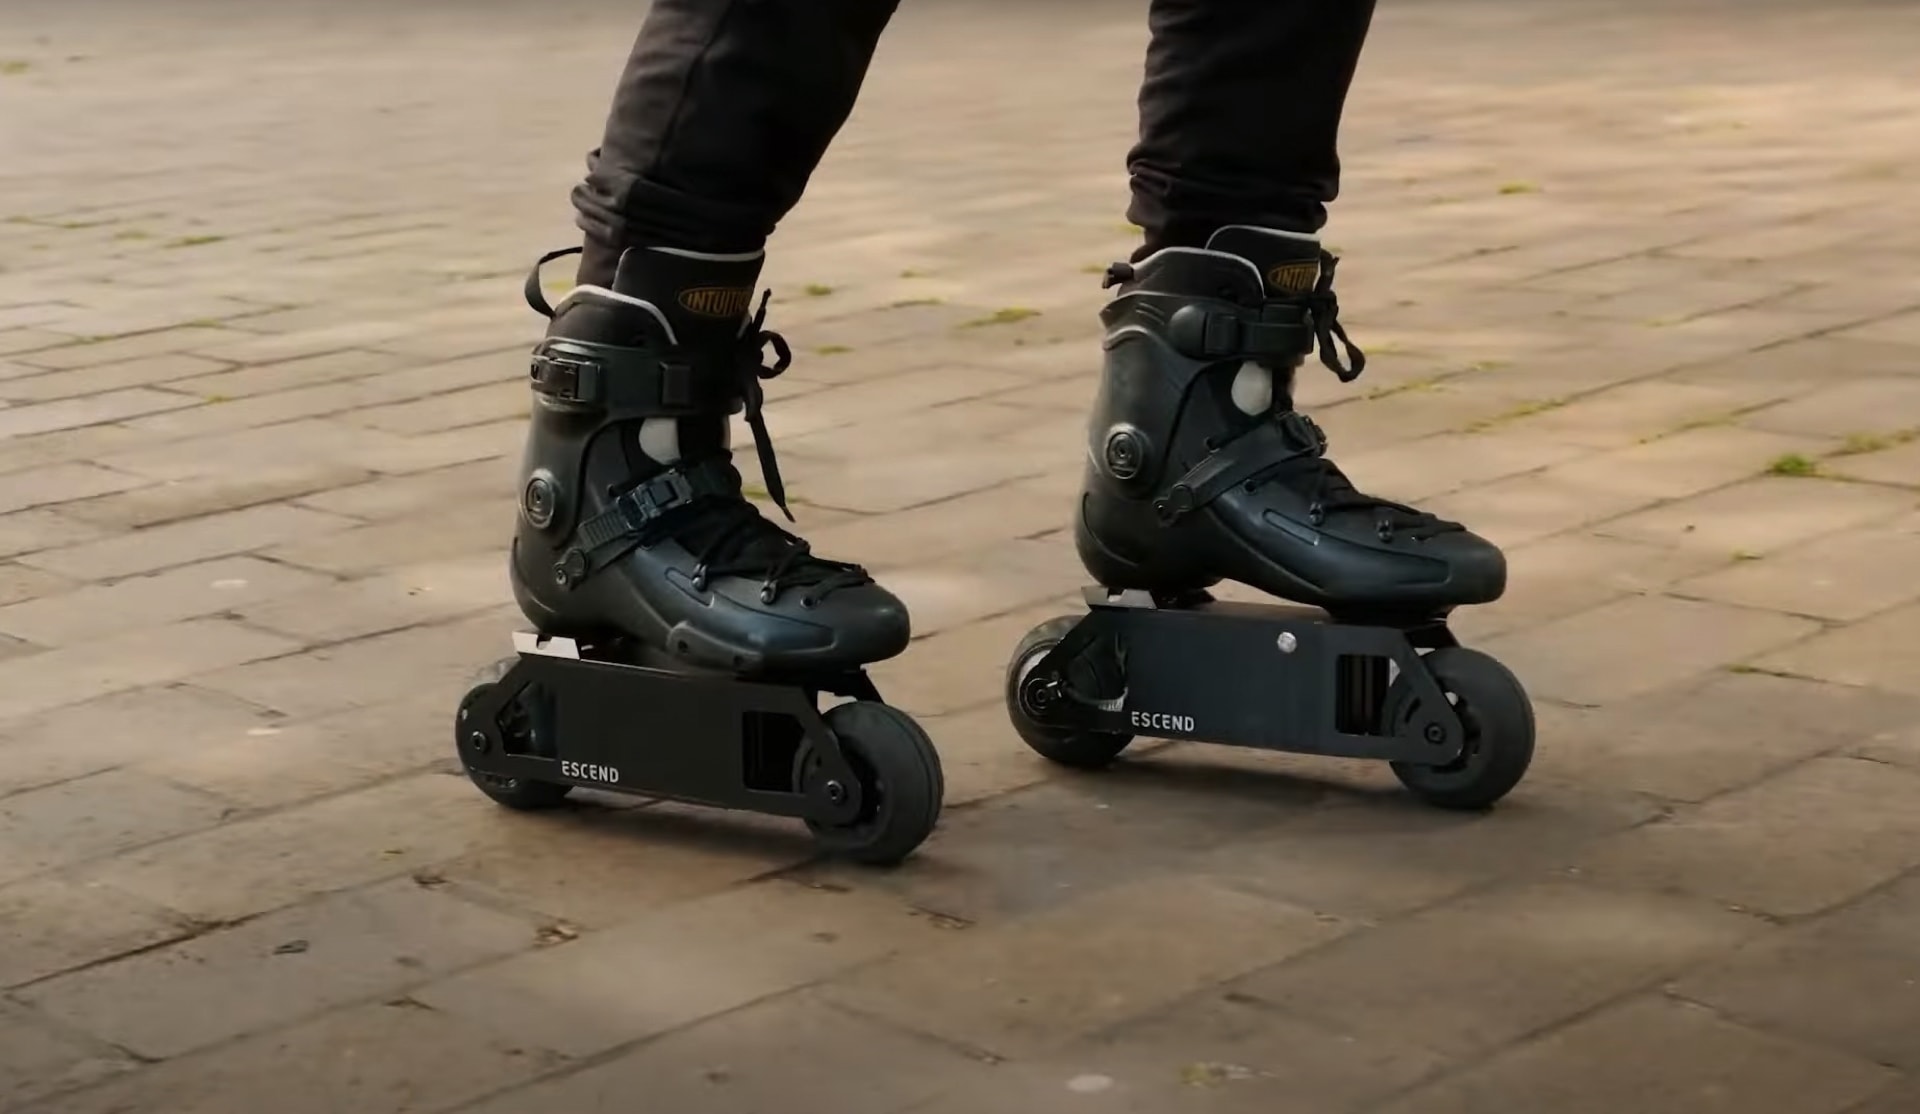 Escend Blades Electric Skates Place 800W of Power at Your Feet, Can Be Used...